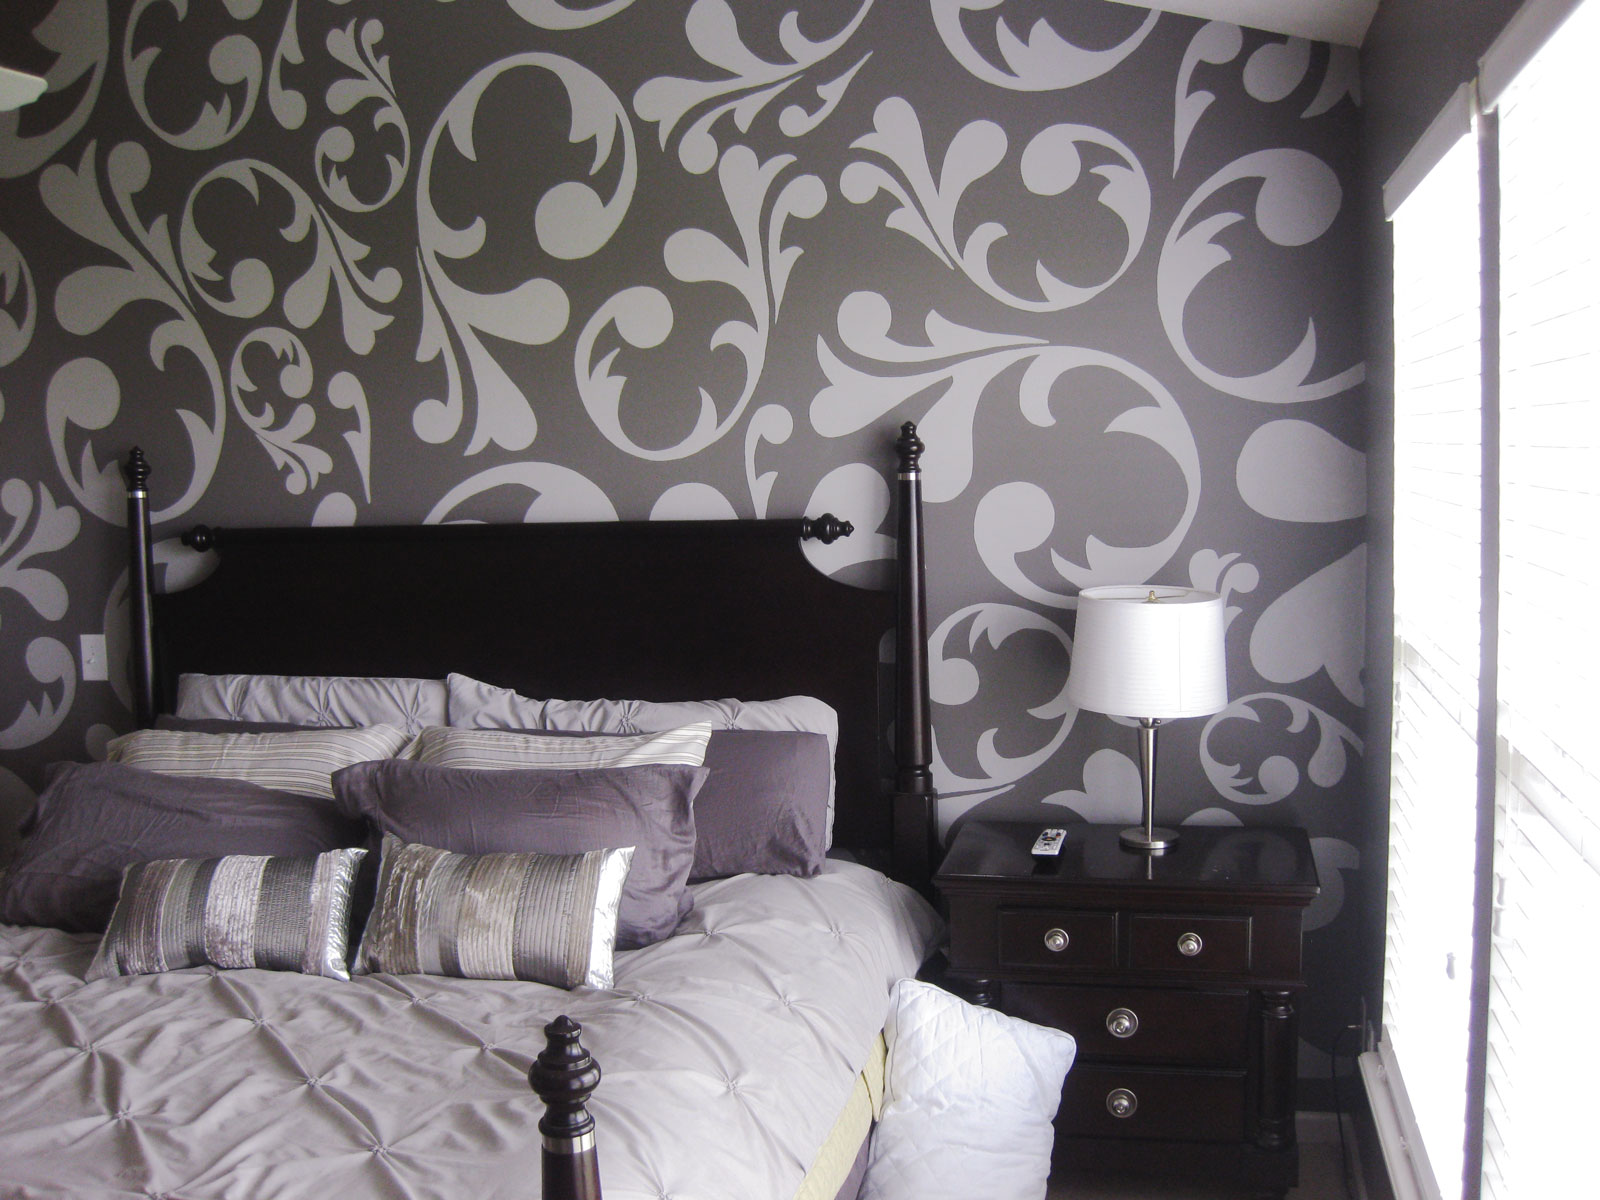 Light gray on gray floral mural on wall behind bed